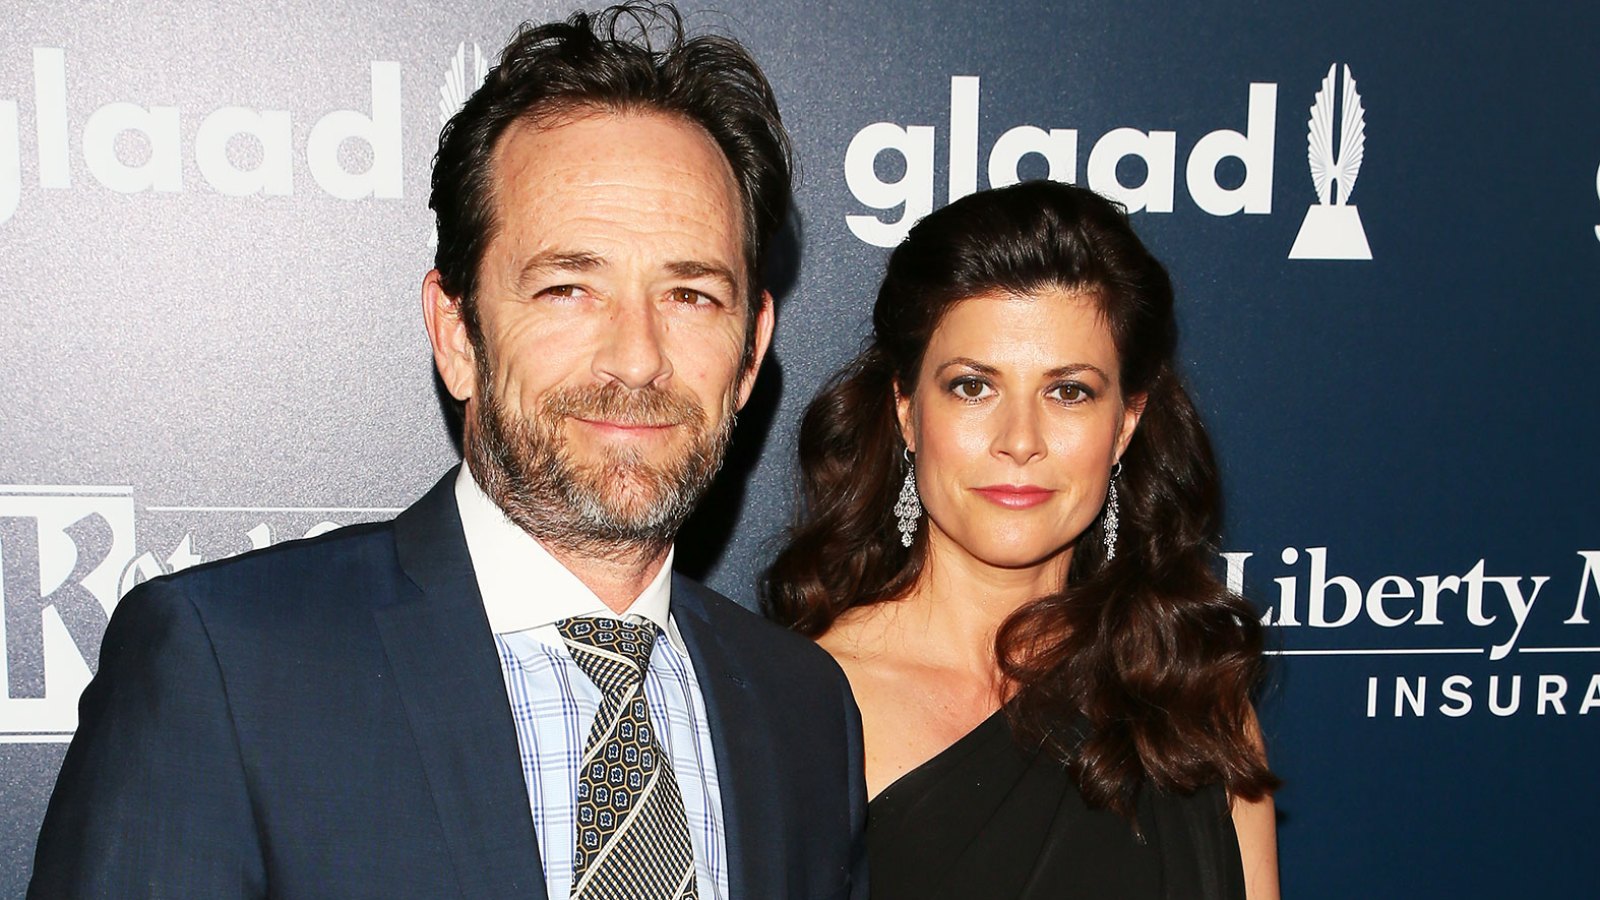 Luke Perry and Fiancee Wendy Madison Bauer Were Set to Wed in August